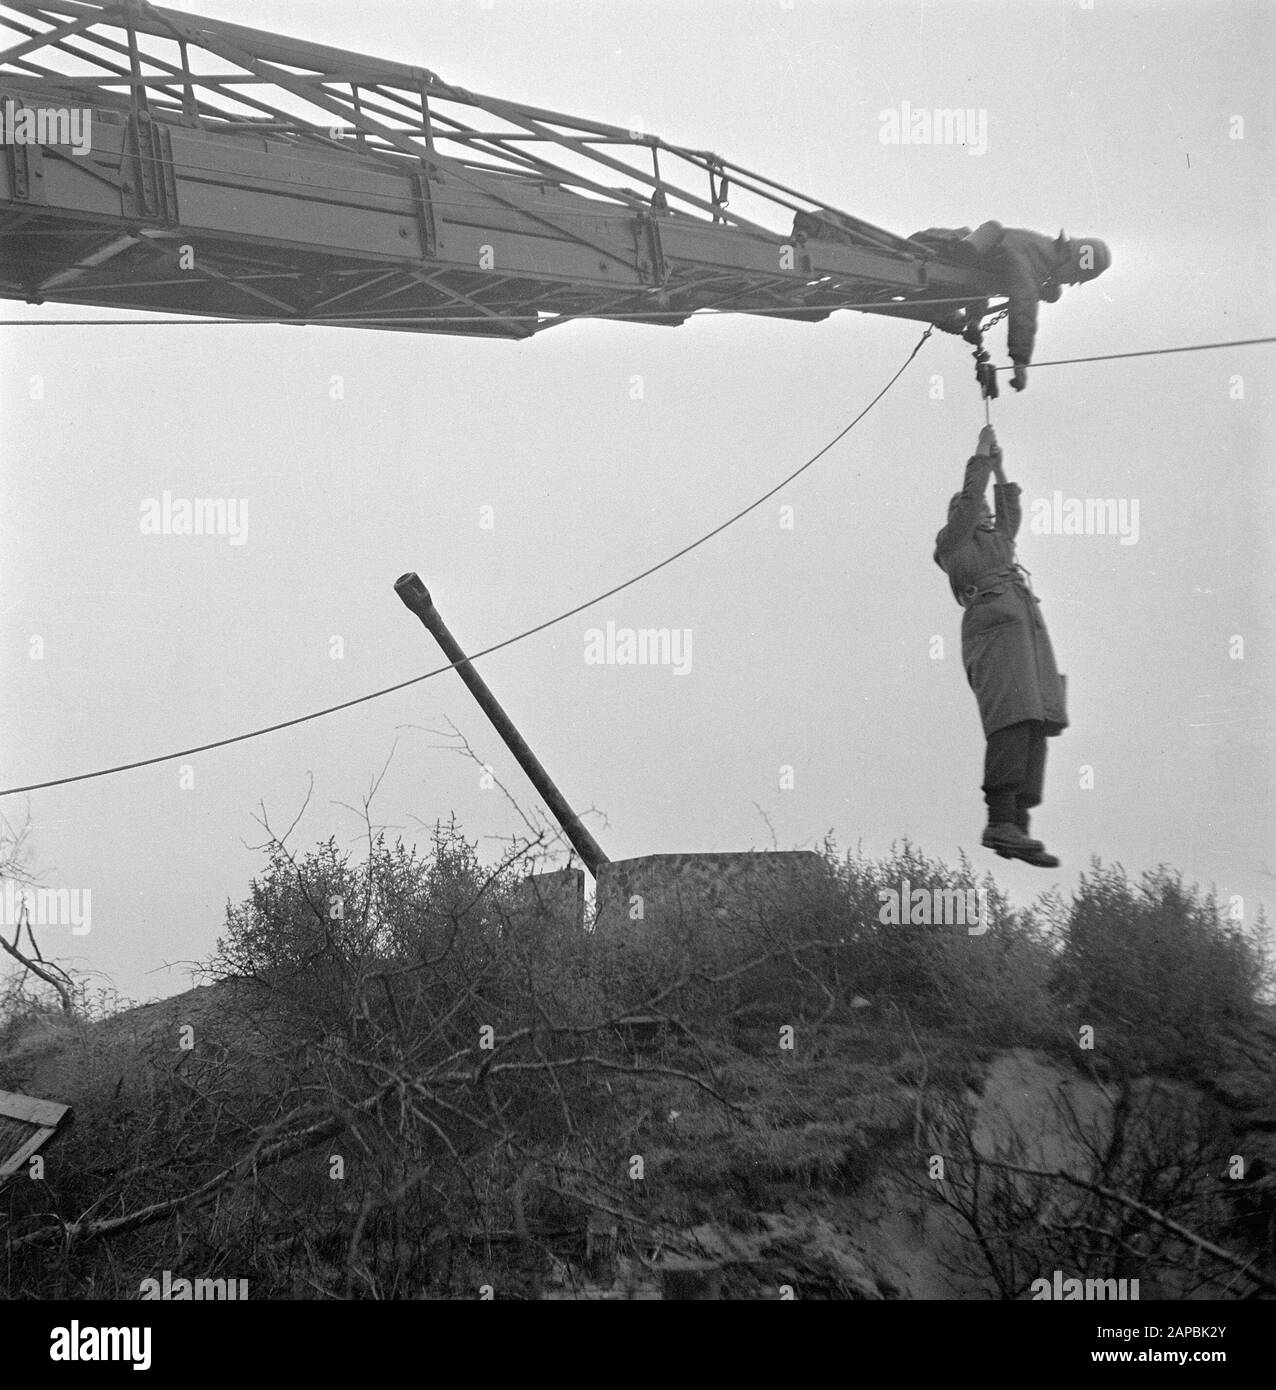 The Hague police and fire department rescue a boy from a former German bunker in a minefield. He was rescued with the help of the Magirus car ladder of the Hague Fire Department Date: 24 December 1945 Location: The Hague, Zuid-Holland Keywords: fire brigade, explosives, children, police, rescue personname: Magirus Stock Photo